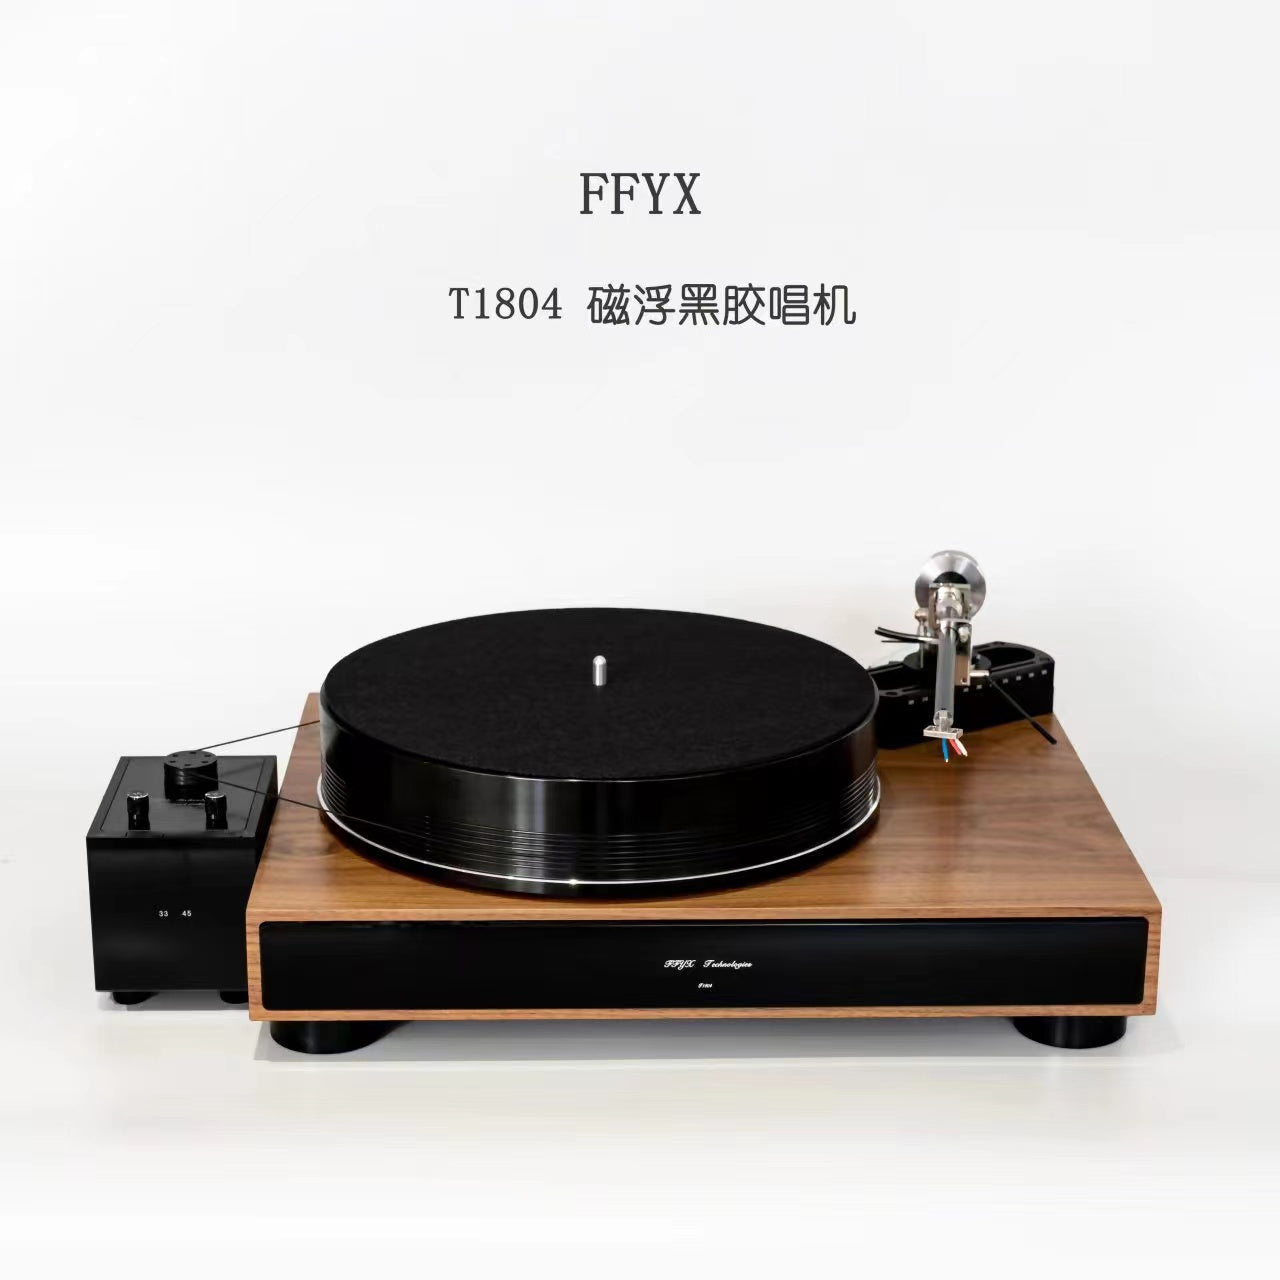 FFYX T1804(a) Maglev/ Air Bearing Turntable